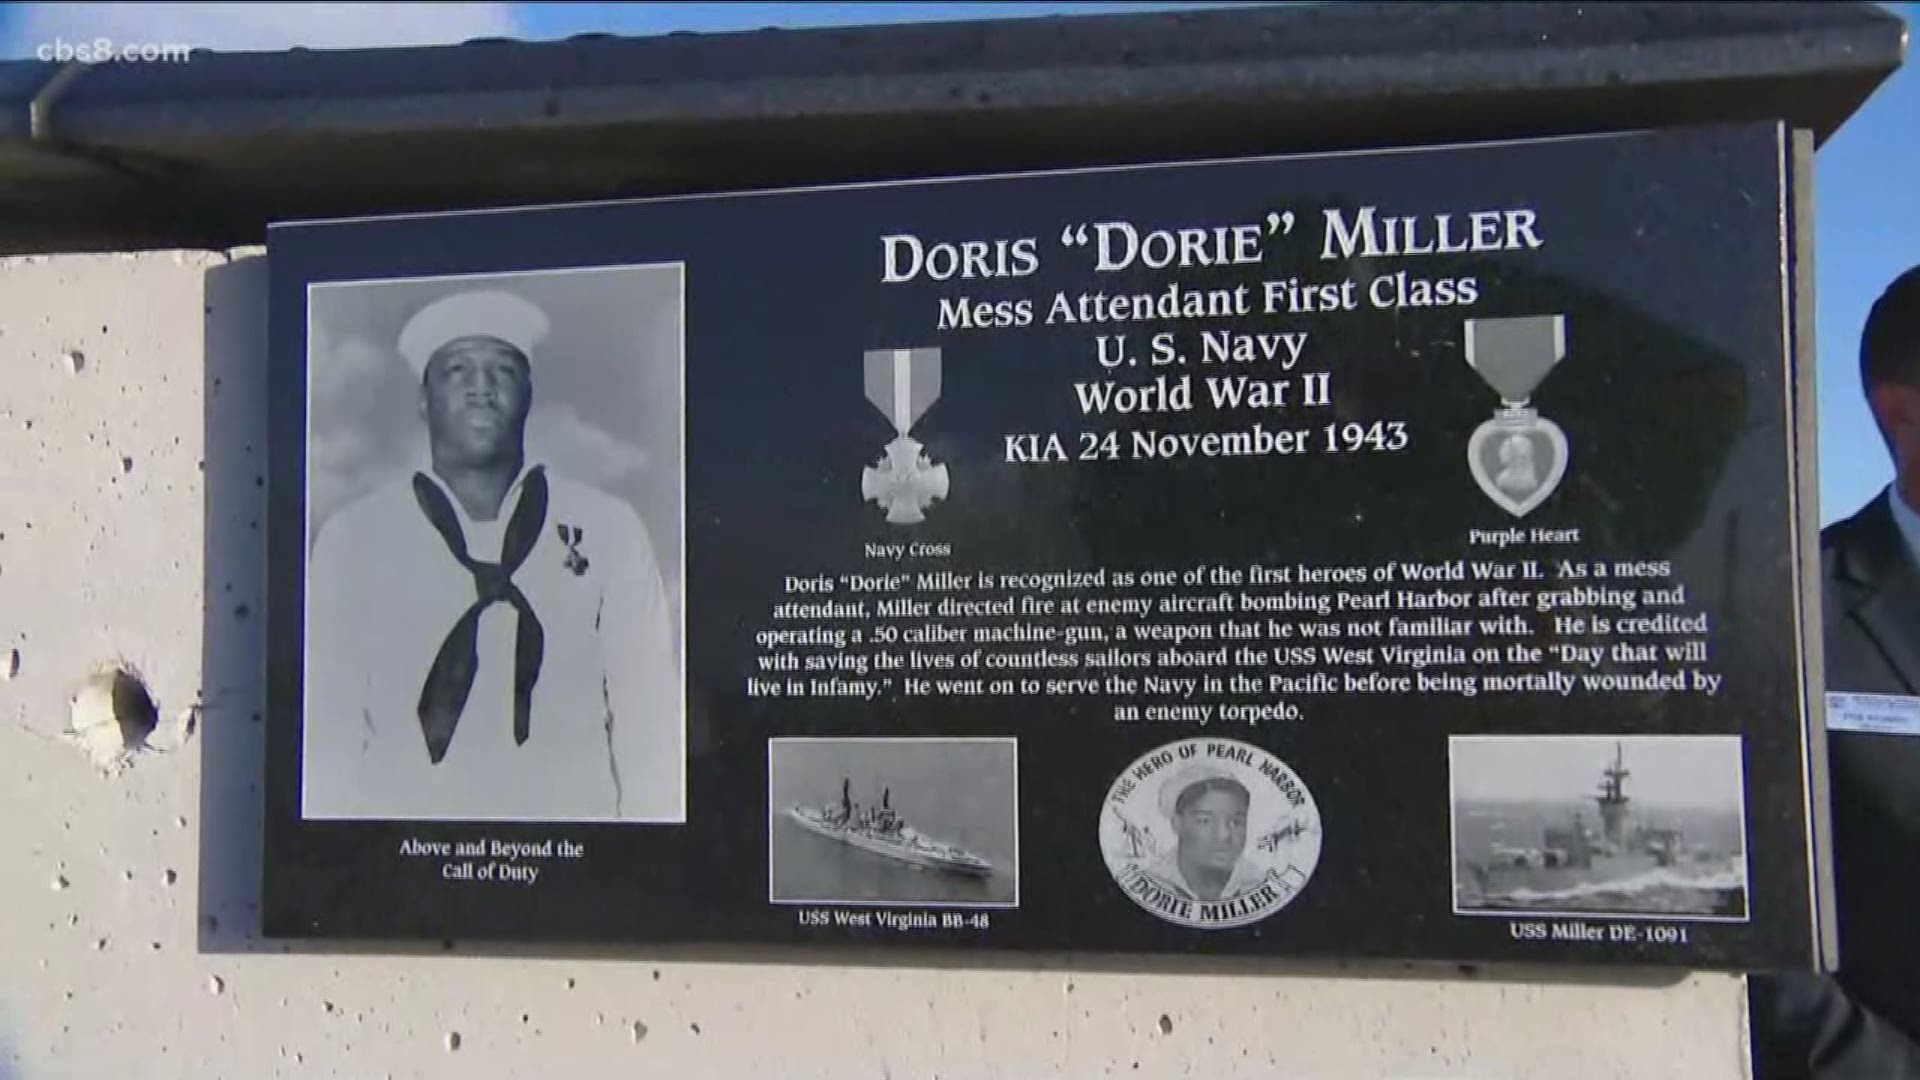 During the attack on Pearl Harbor, Doris Miller manned anti-aircraft guns without any training and helped the wounded.